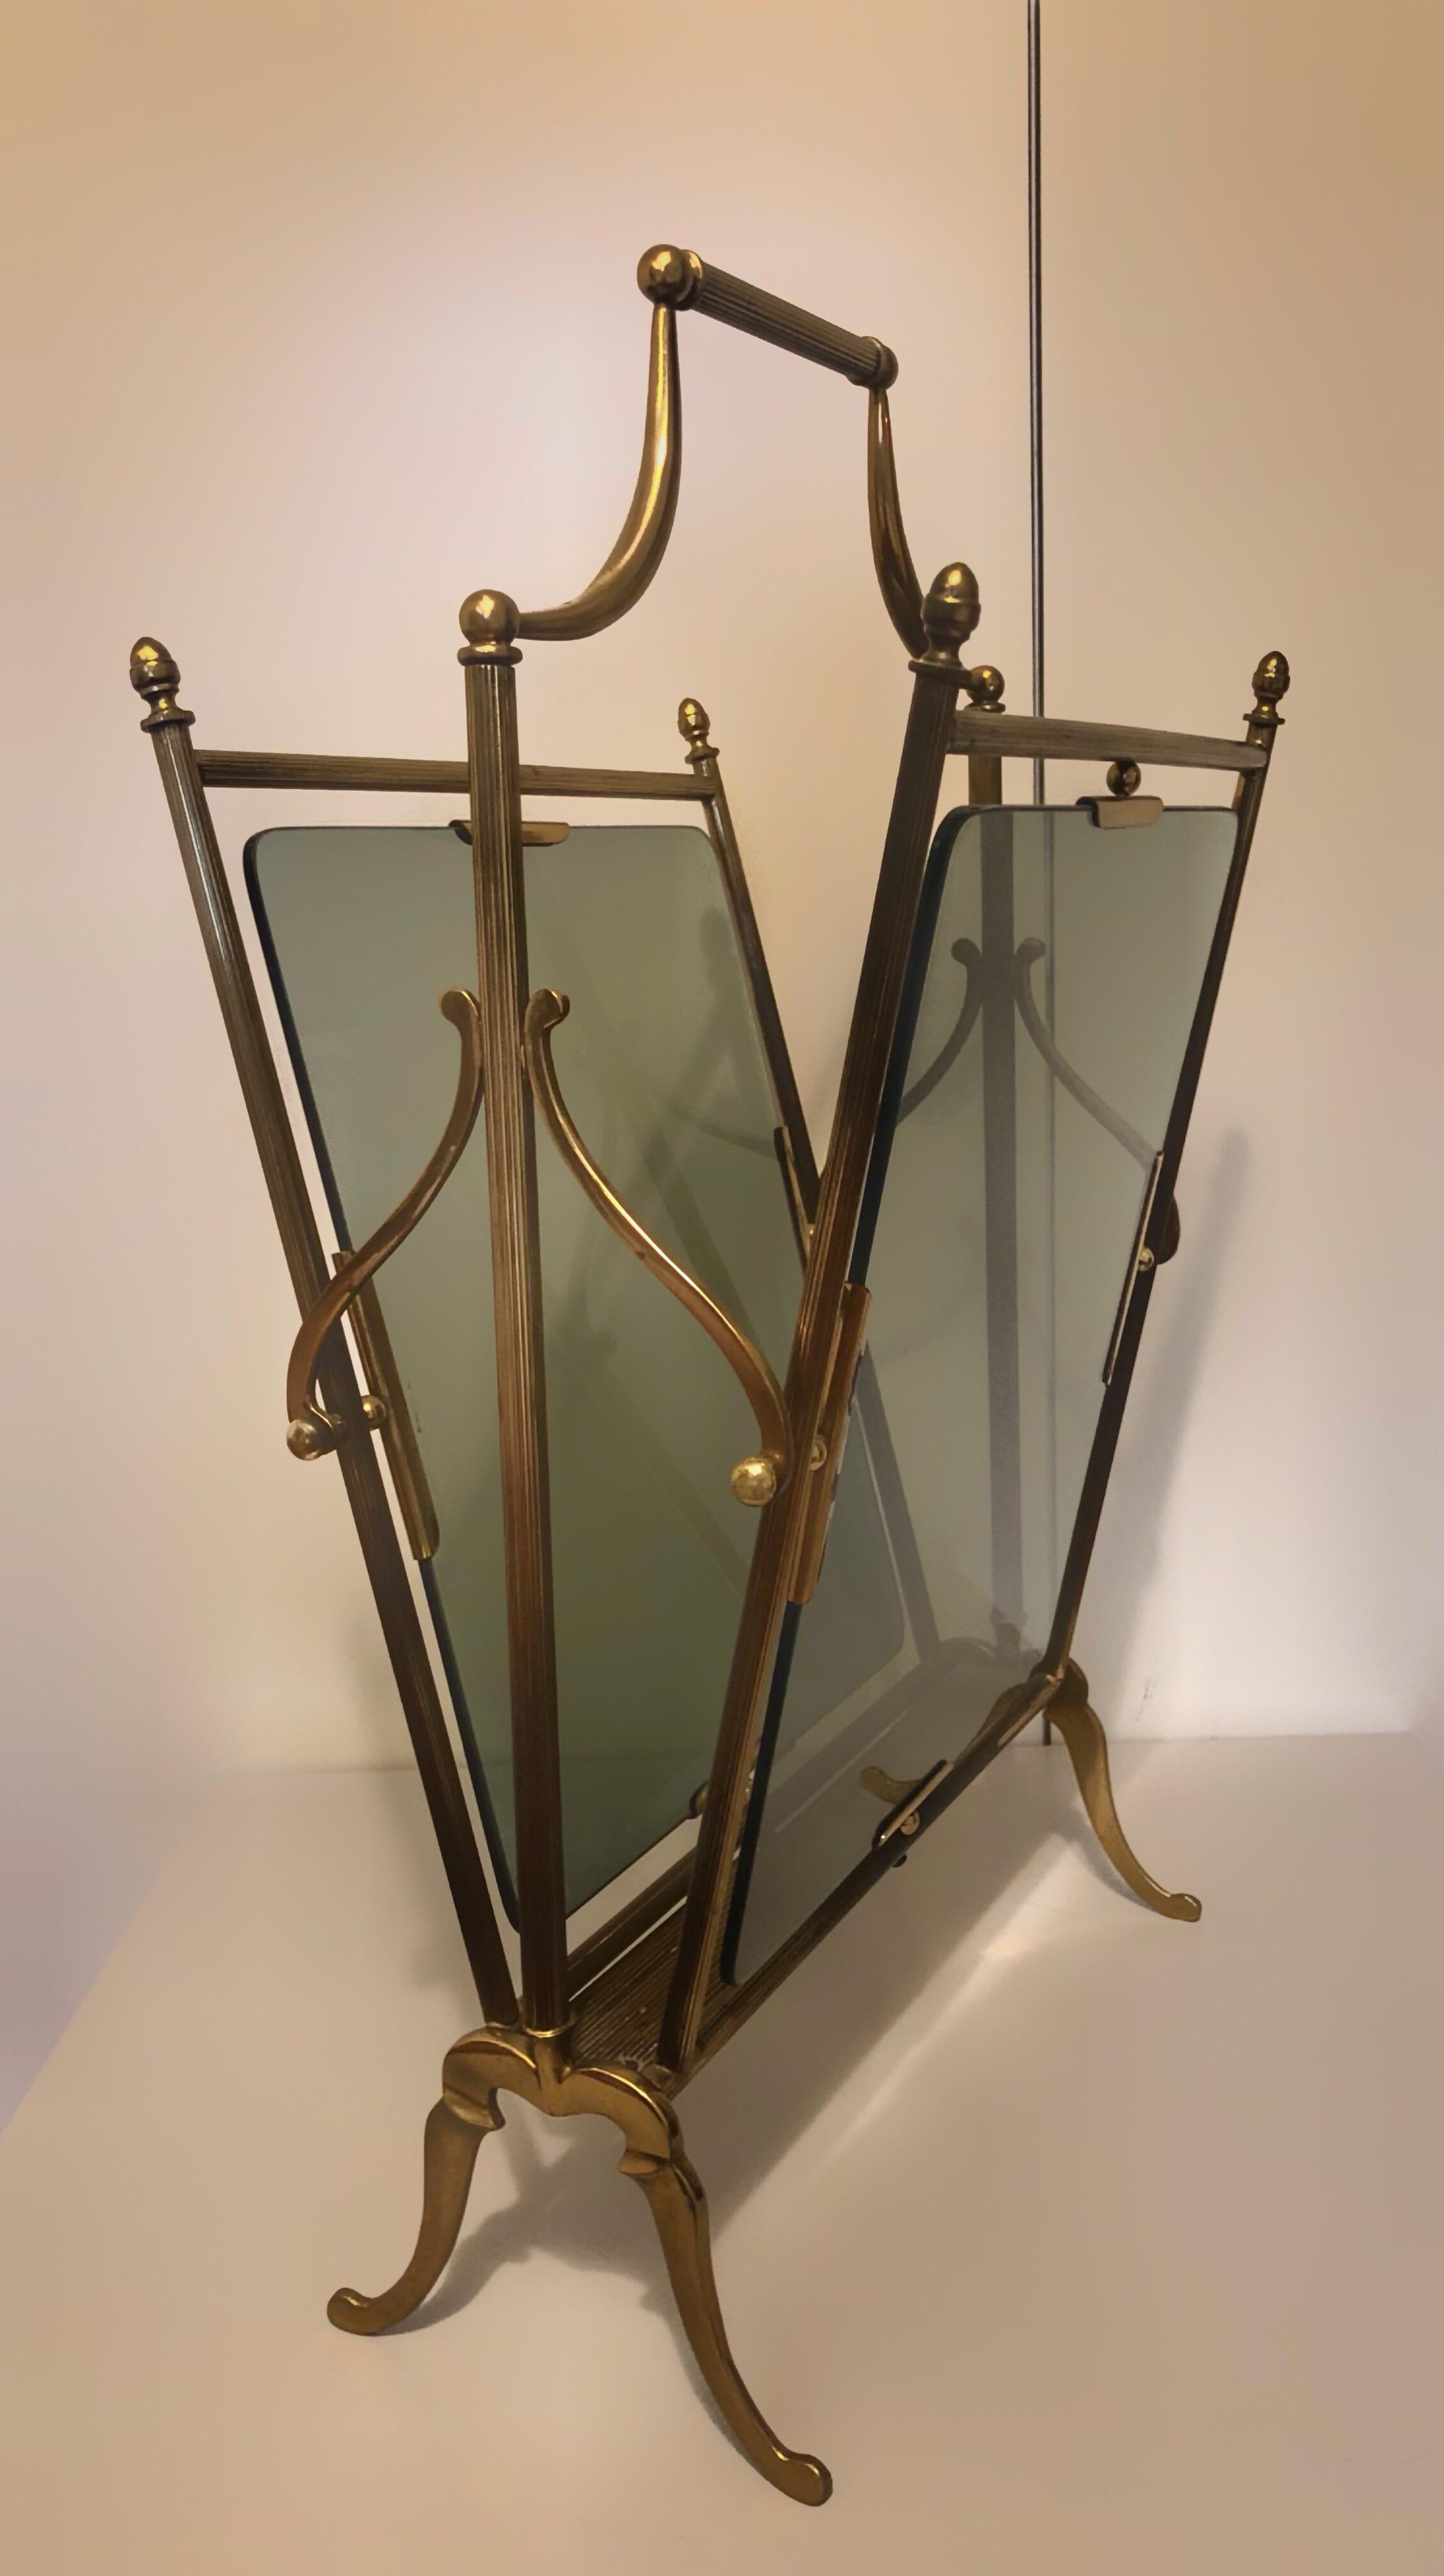 Gio Ponti style midcentury brass with glass magazine stand holder or rack, Italy, circa 1940
Beautiful and elegant style, green glass
Made in Italy 

Giovanni 